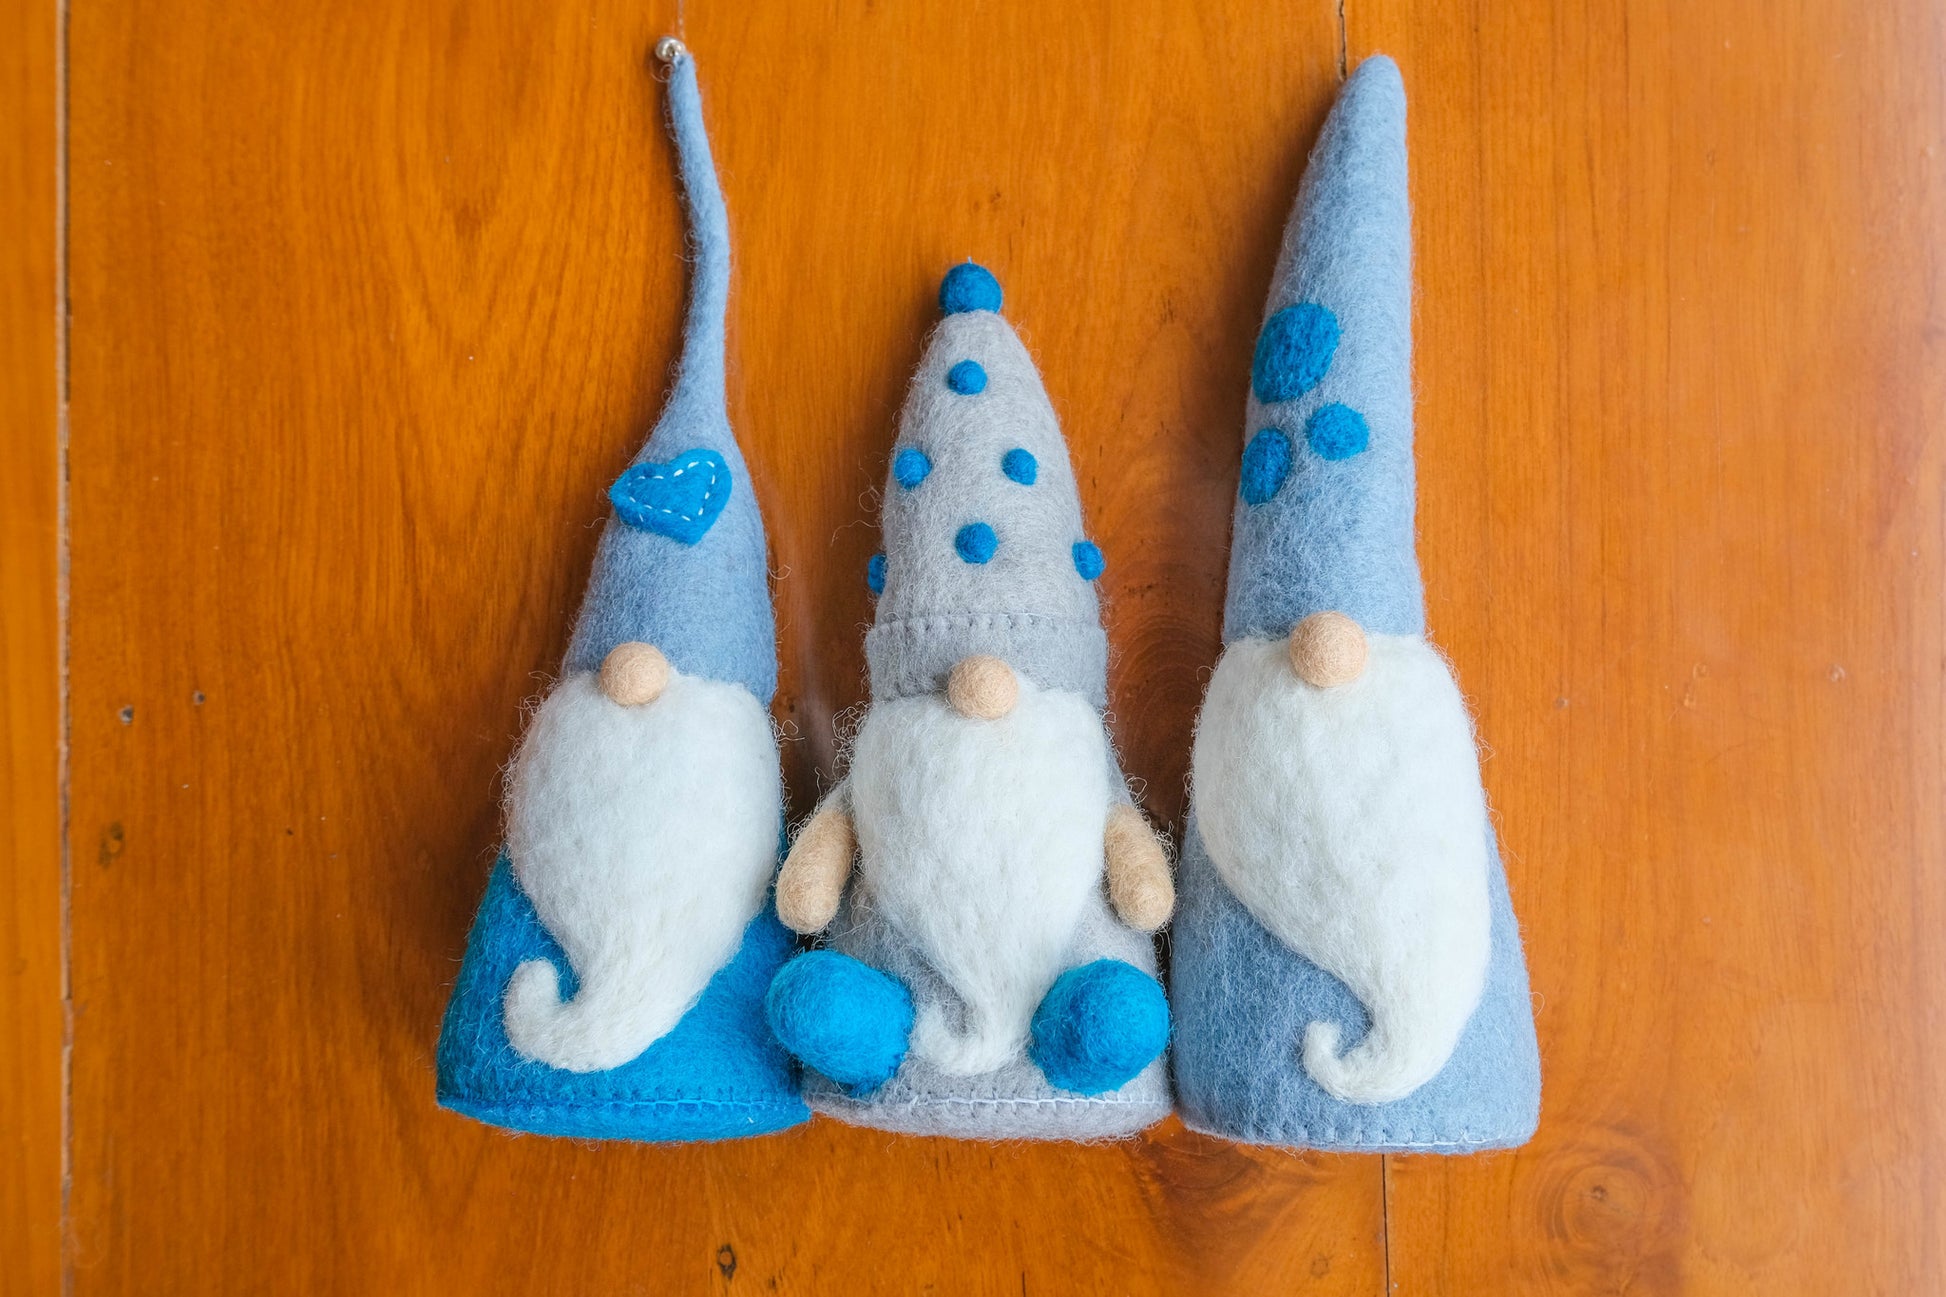 This Global Groove Life, handmade, ethical, fair trade, eco-friendly, sustainable, felt, set of 3 bearded whimsical winter gnomes ,was created by artisans in Kathmandu Nepal and will be a beautiful addition to your Christmas decor this holiday season.